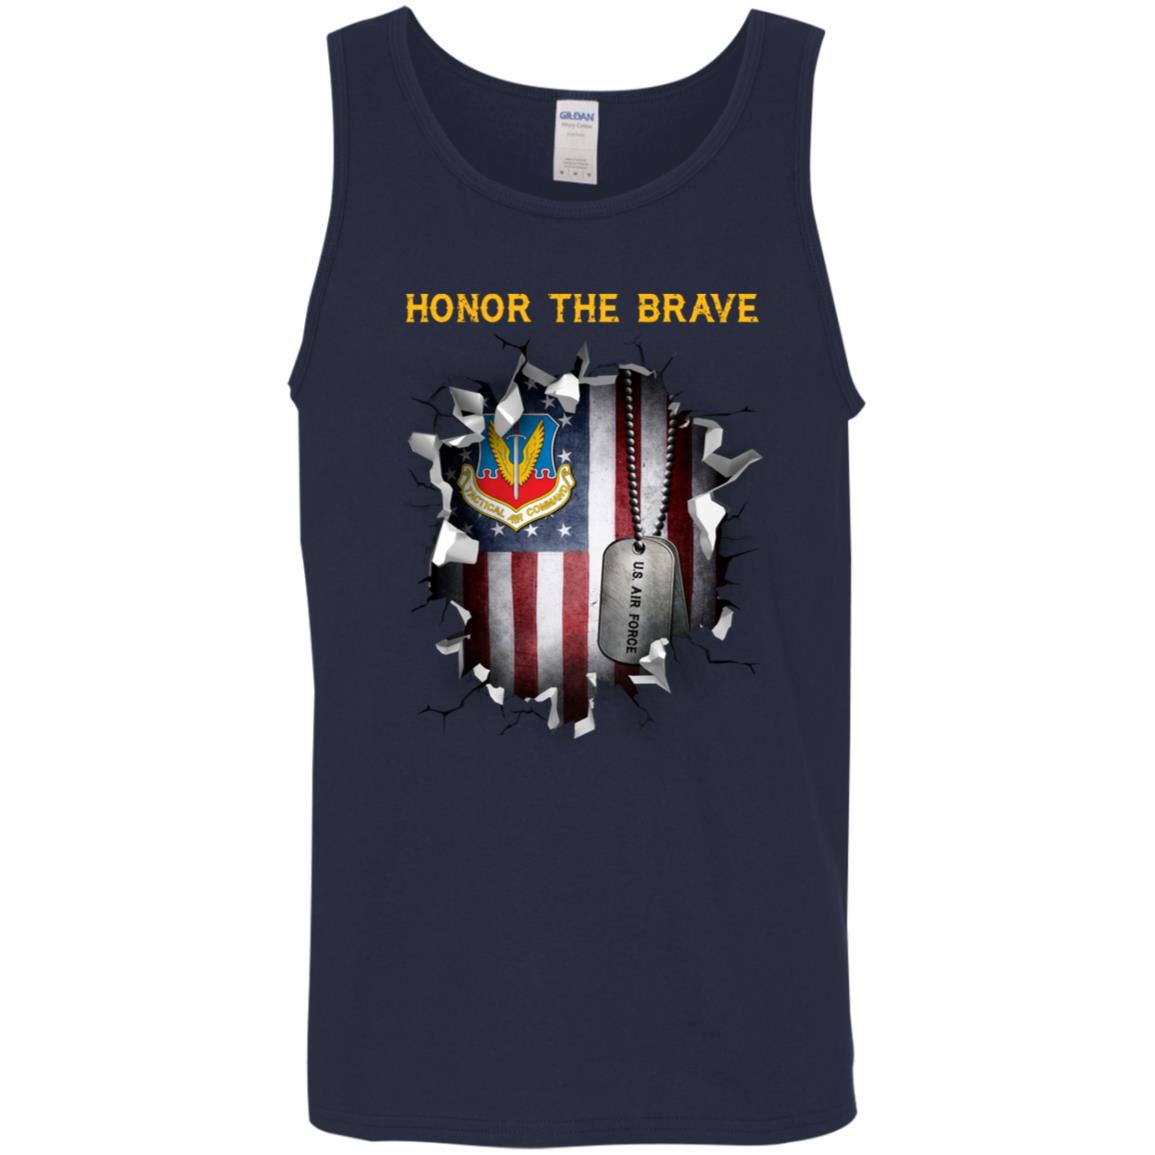 US Air Force Tactical Air Command - Honor The Brave Front Shirt